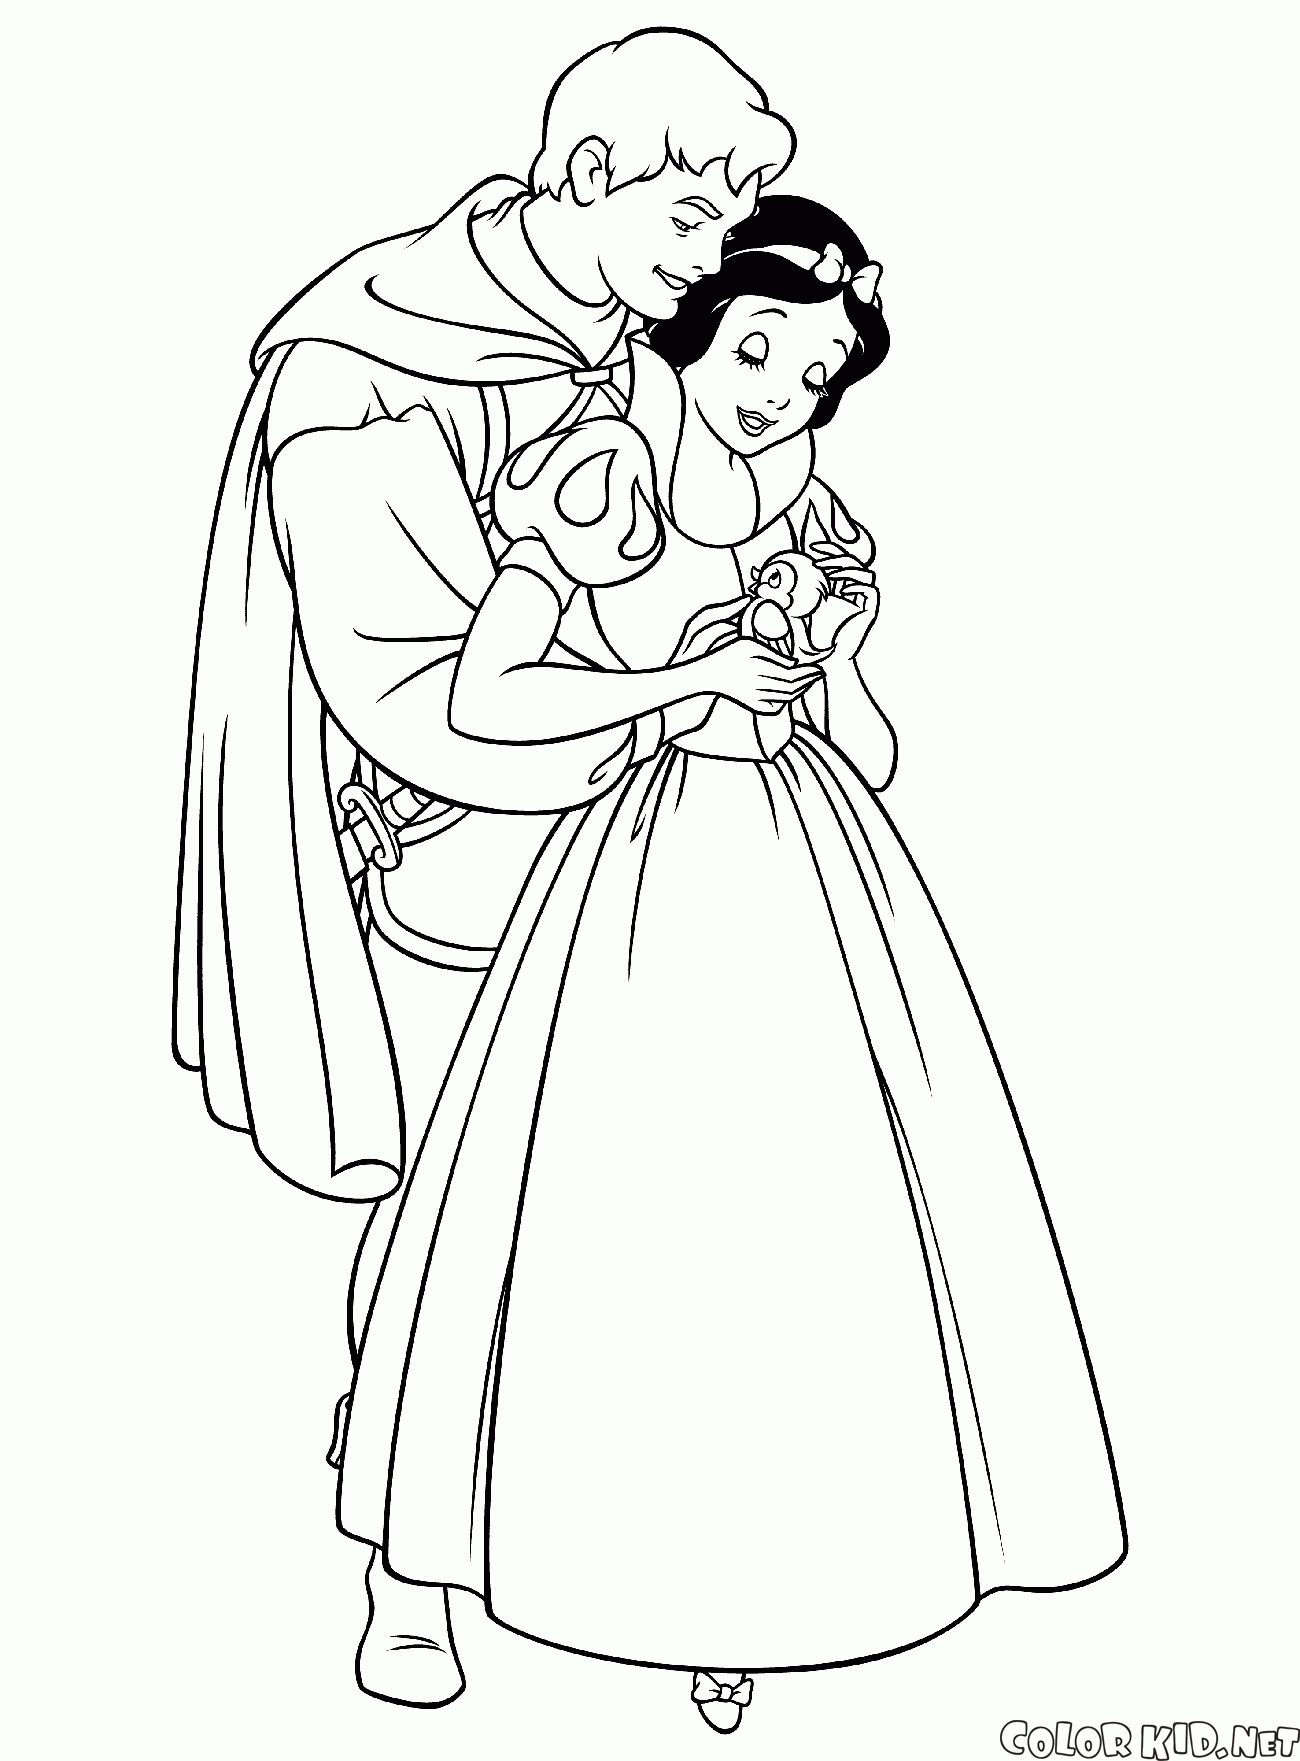 Snow White and the prince of love